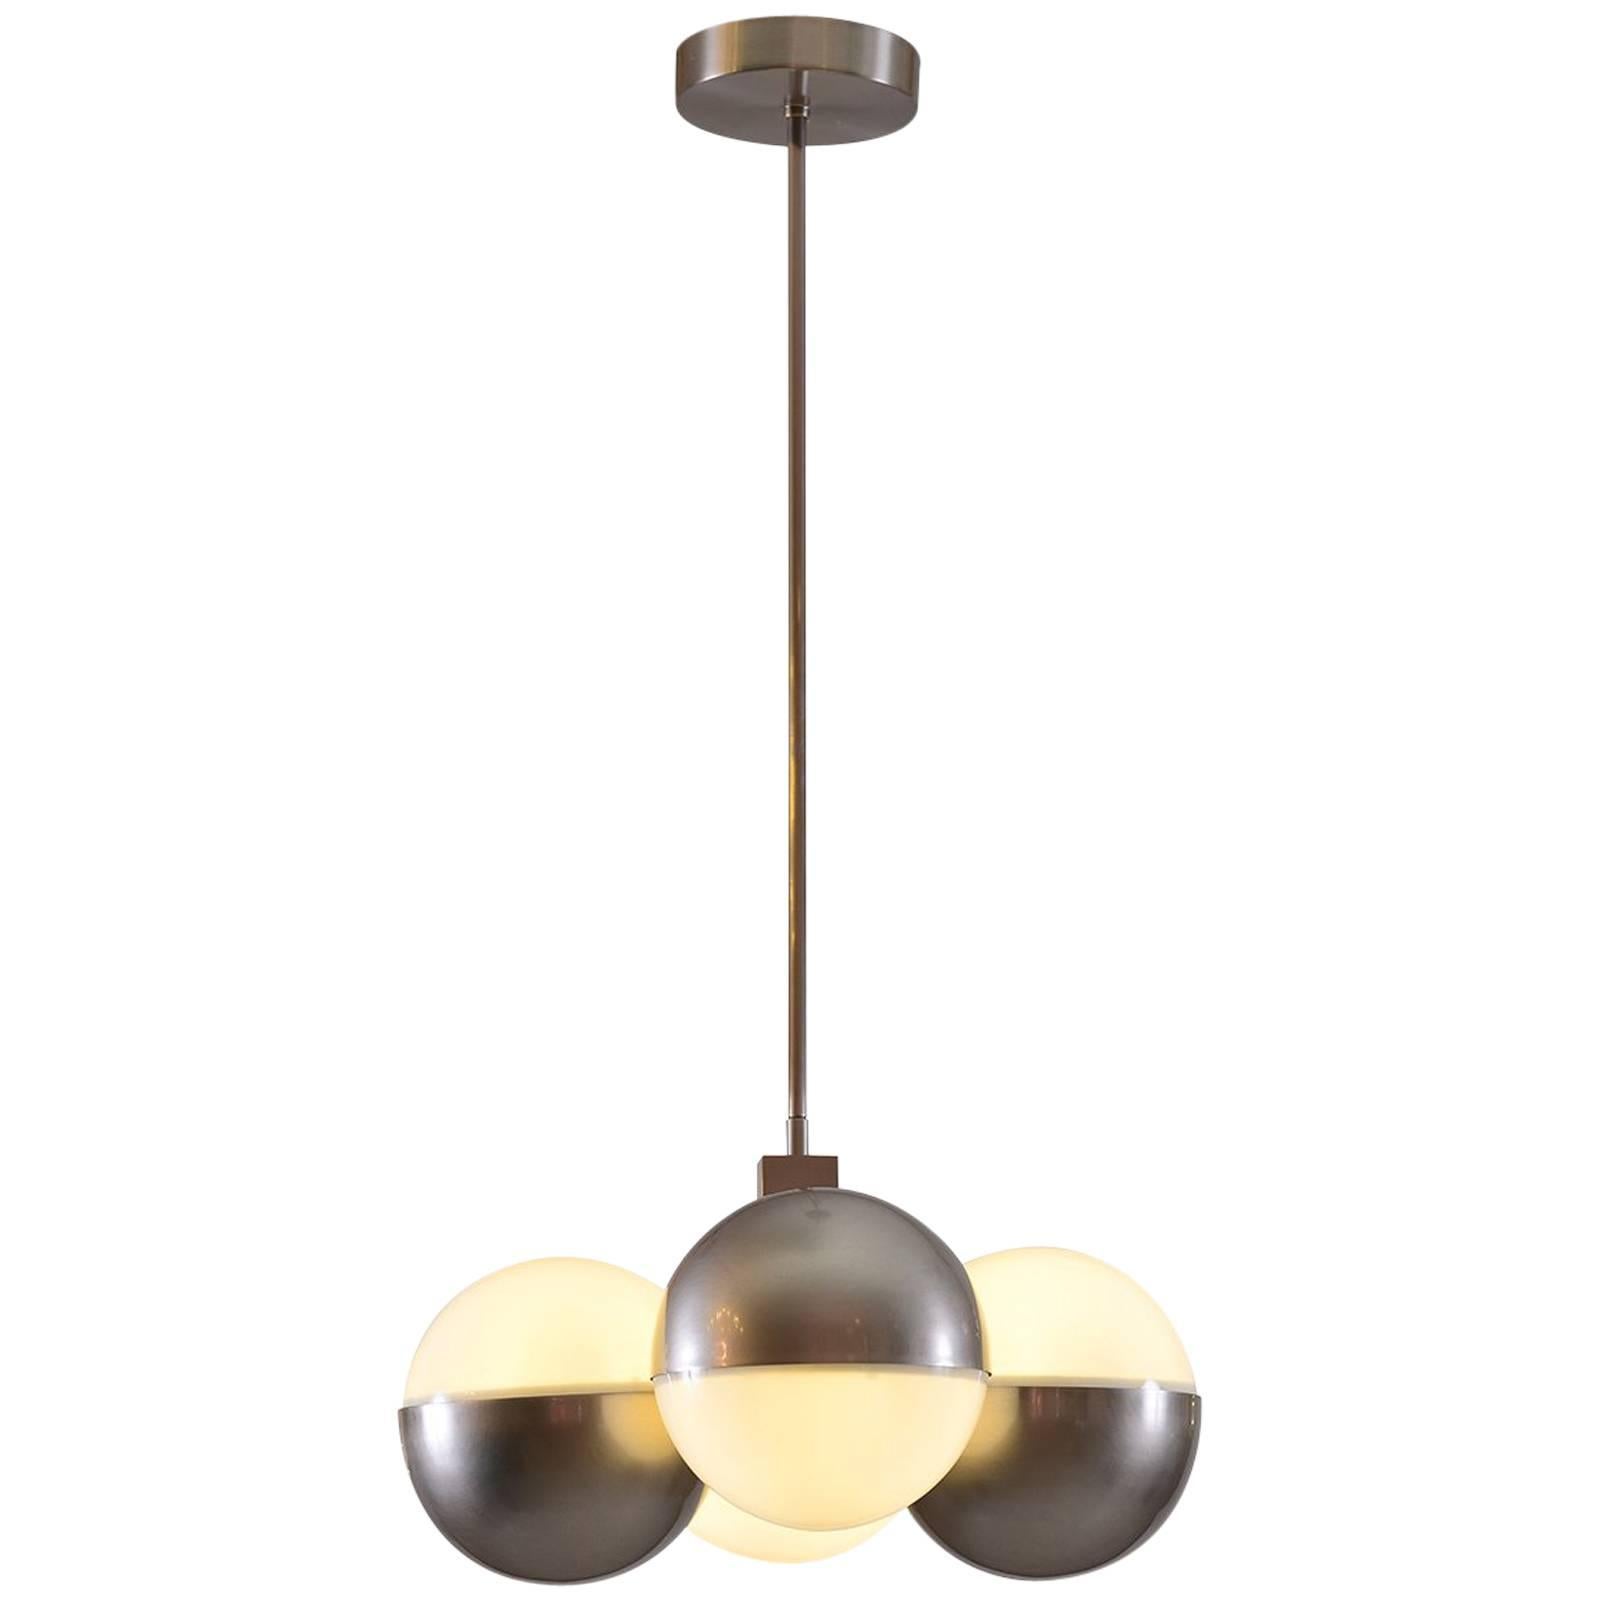 Machine Age, Art Deco Style Ceiling Lamp, Re-Edition